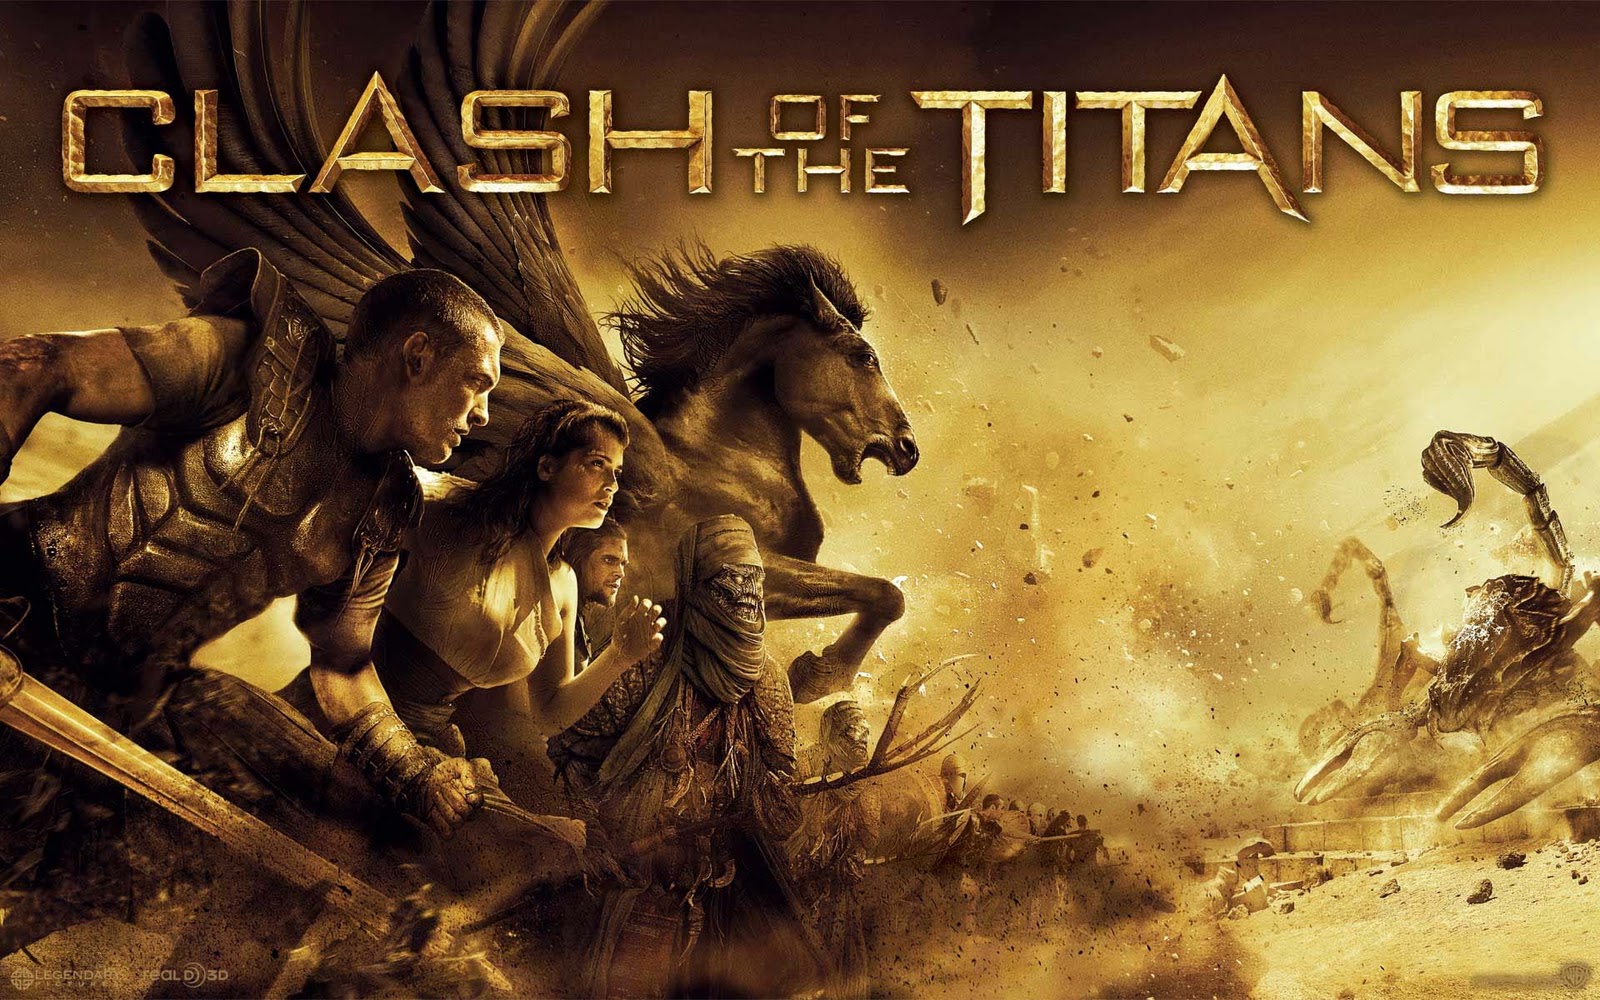 Wrath of the Titans DVD Release Date June 26, 2012